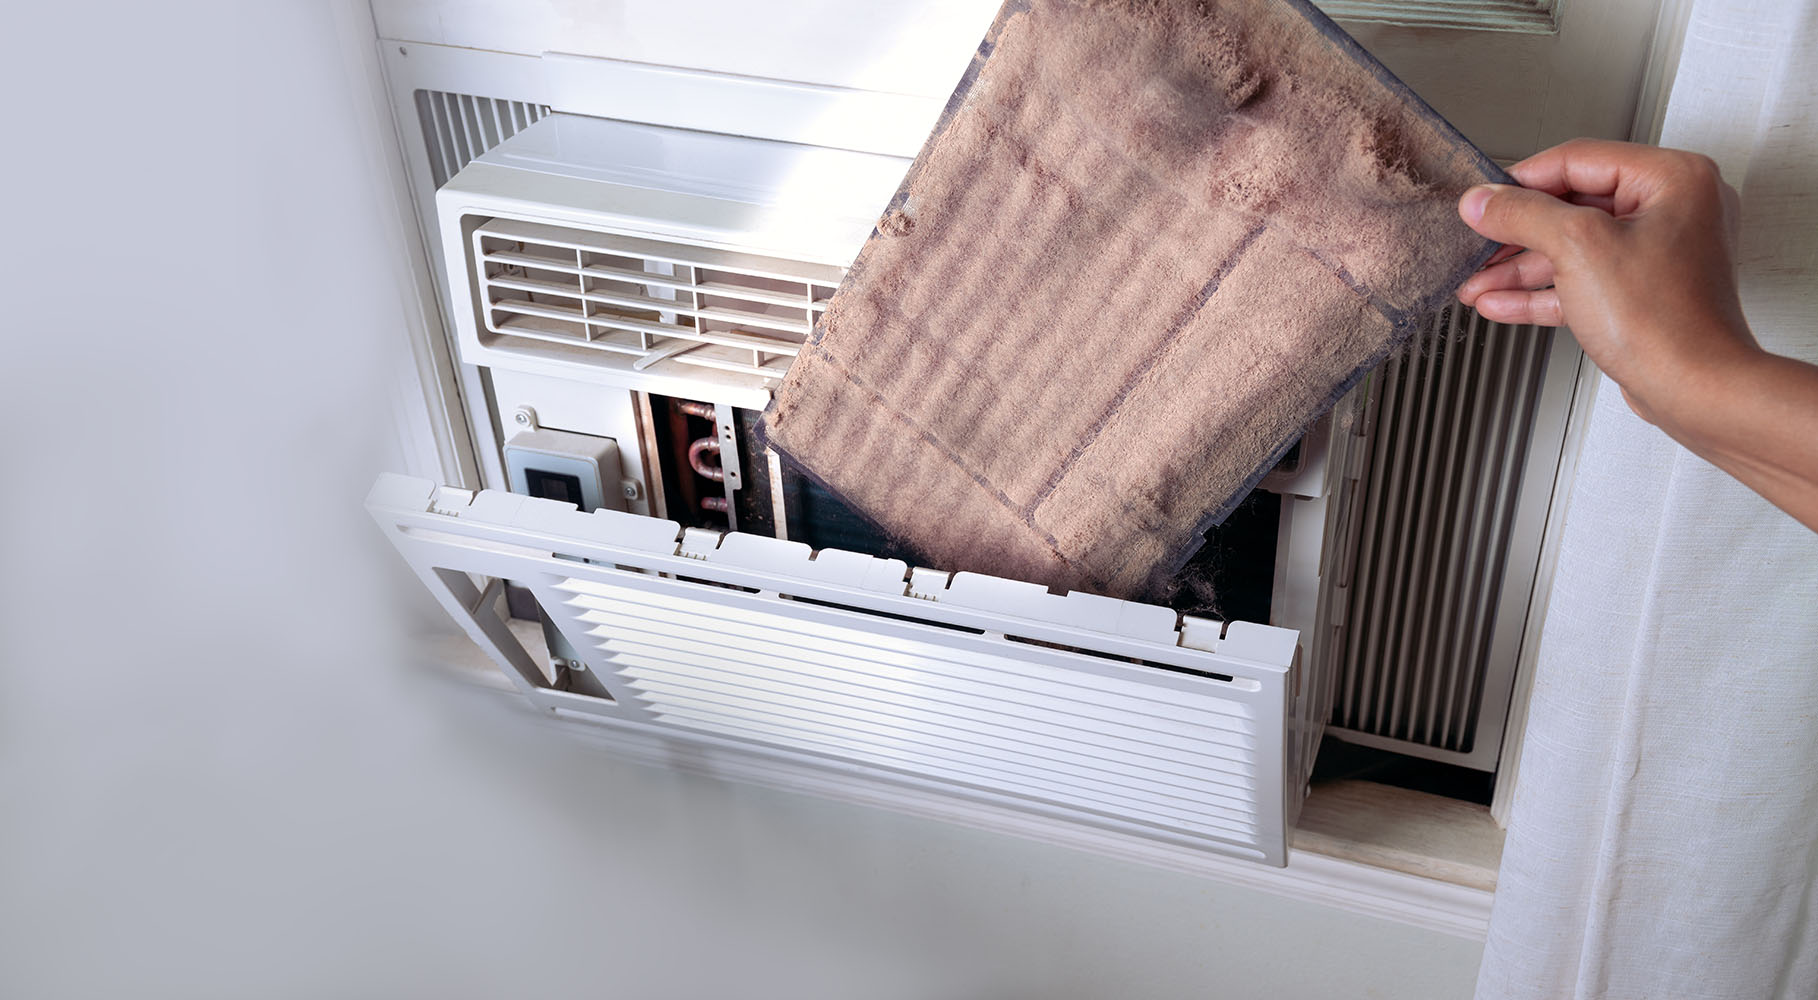 Dirty filters can cause air conditioners to malfunction